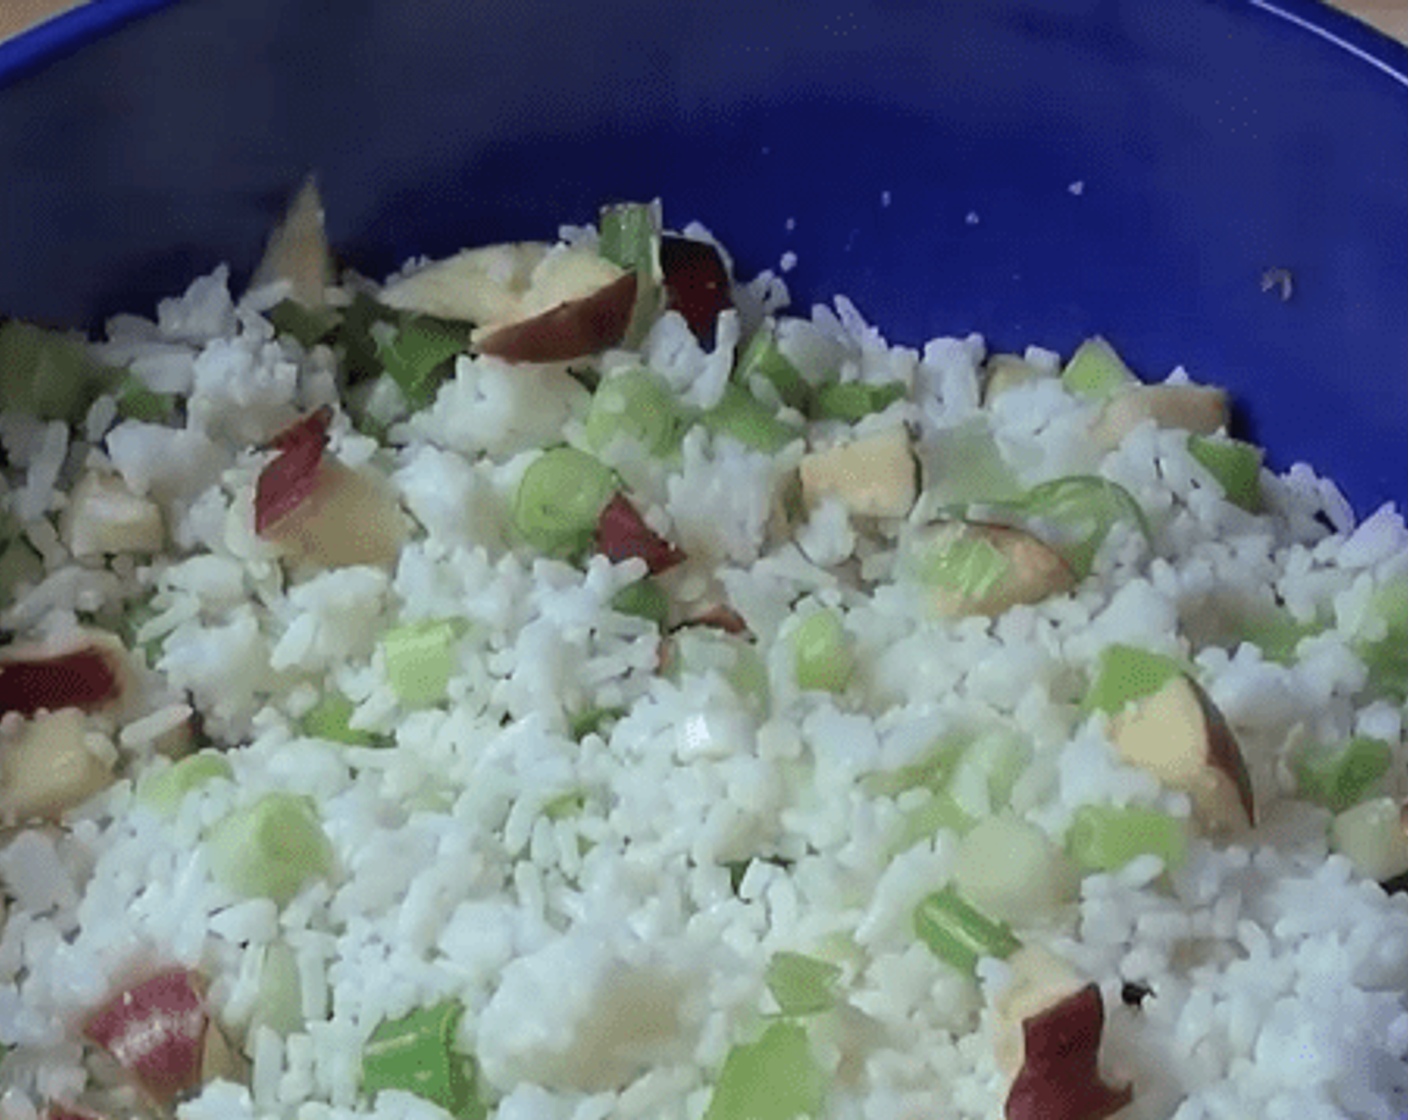 step 3 Get the cookedWhite Rice (1 1/3 cups) in a big bowl. Add in Celery (1 stalk) and Scallion (1 bunch), In order to add a bit color and some sweetness, chop up Red Apple (1) and dust that up. Toss them together.